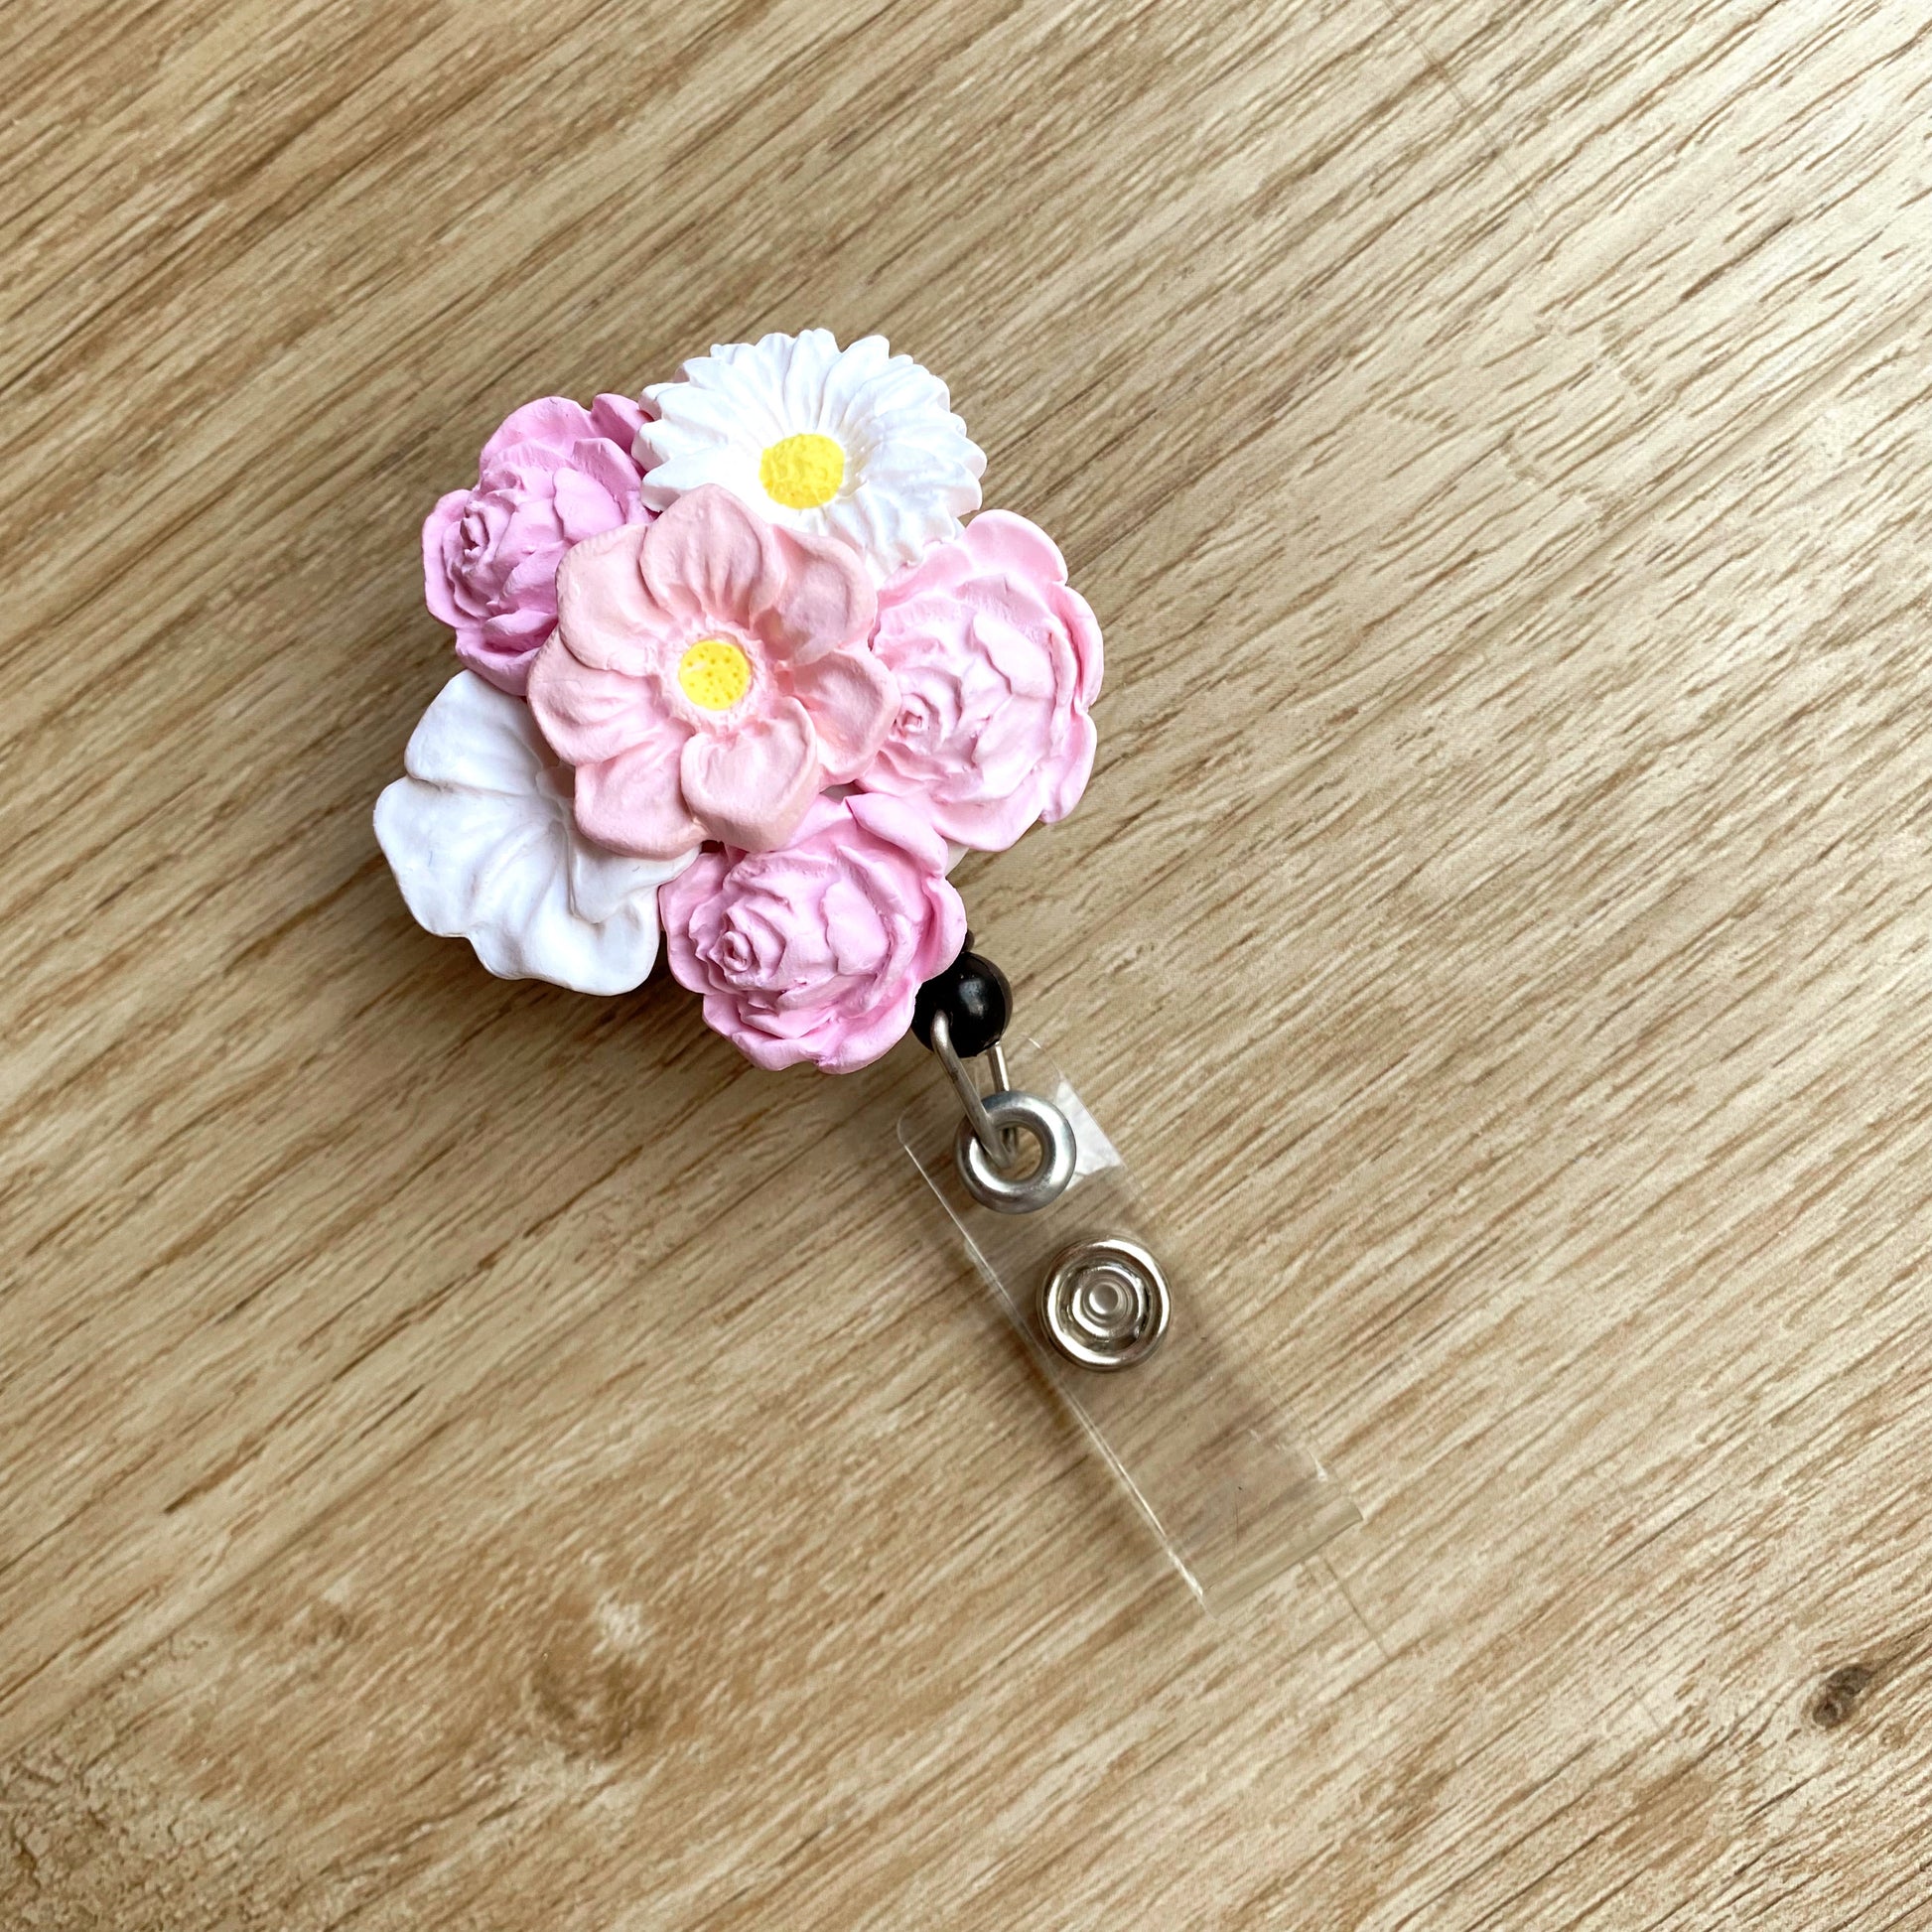 floral retractable badge reel, made with polymer clay in beautiful pink and white